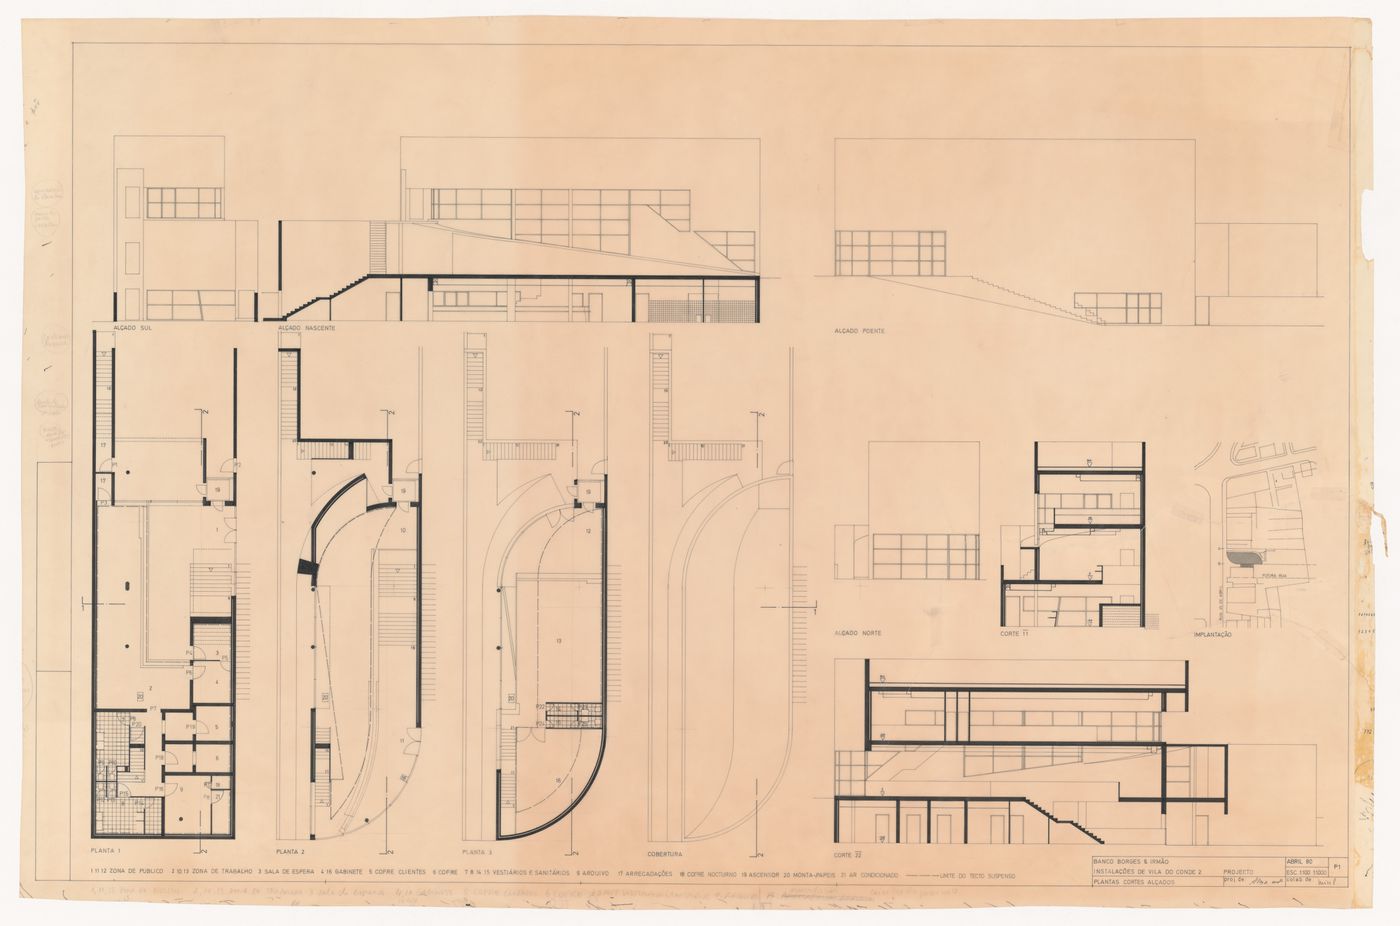 Elevations, sections, and plans for Banco Borges & Irmão II [Borges & Irmão bank II], Vila do Conde, Portugal